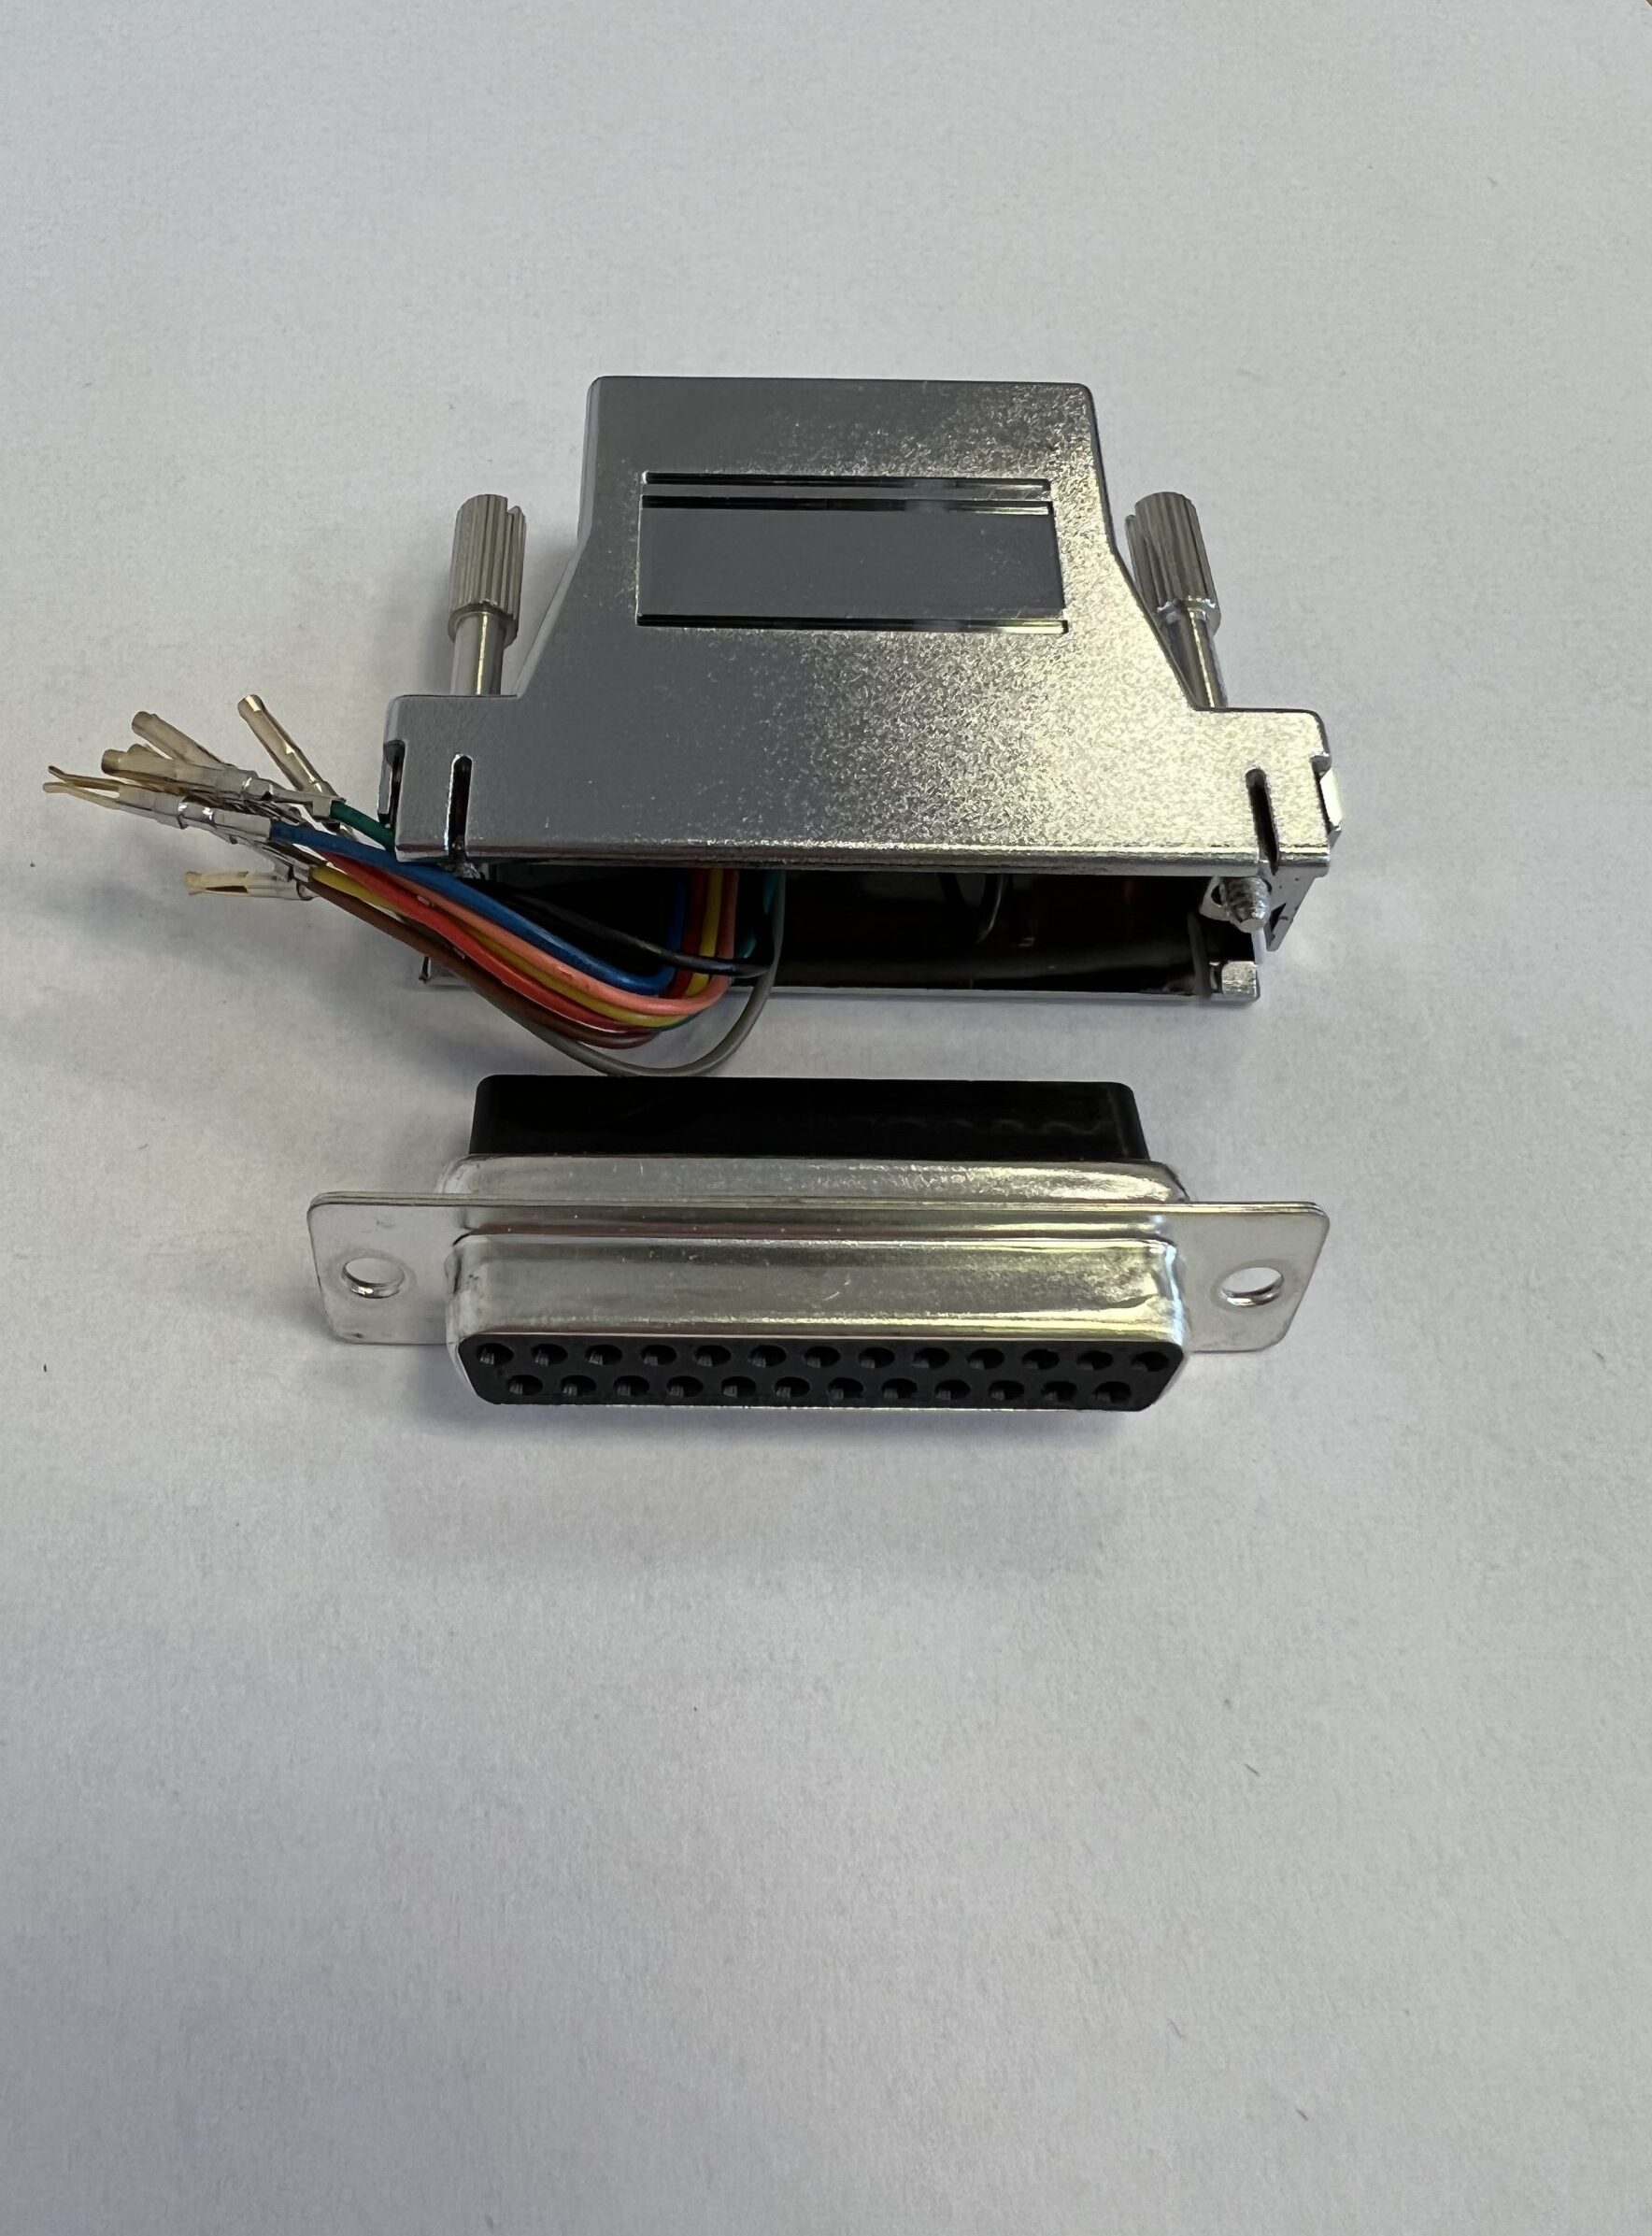 Shielded RJ45 to Sub D Modular Adaptor kits with Female connectors